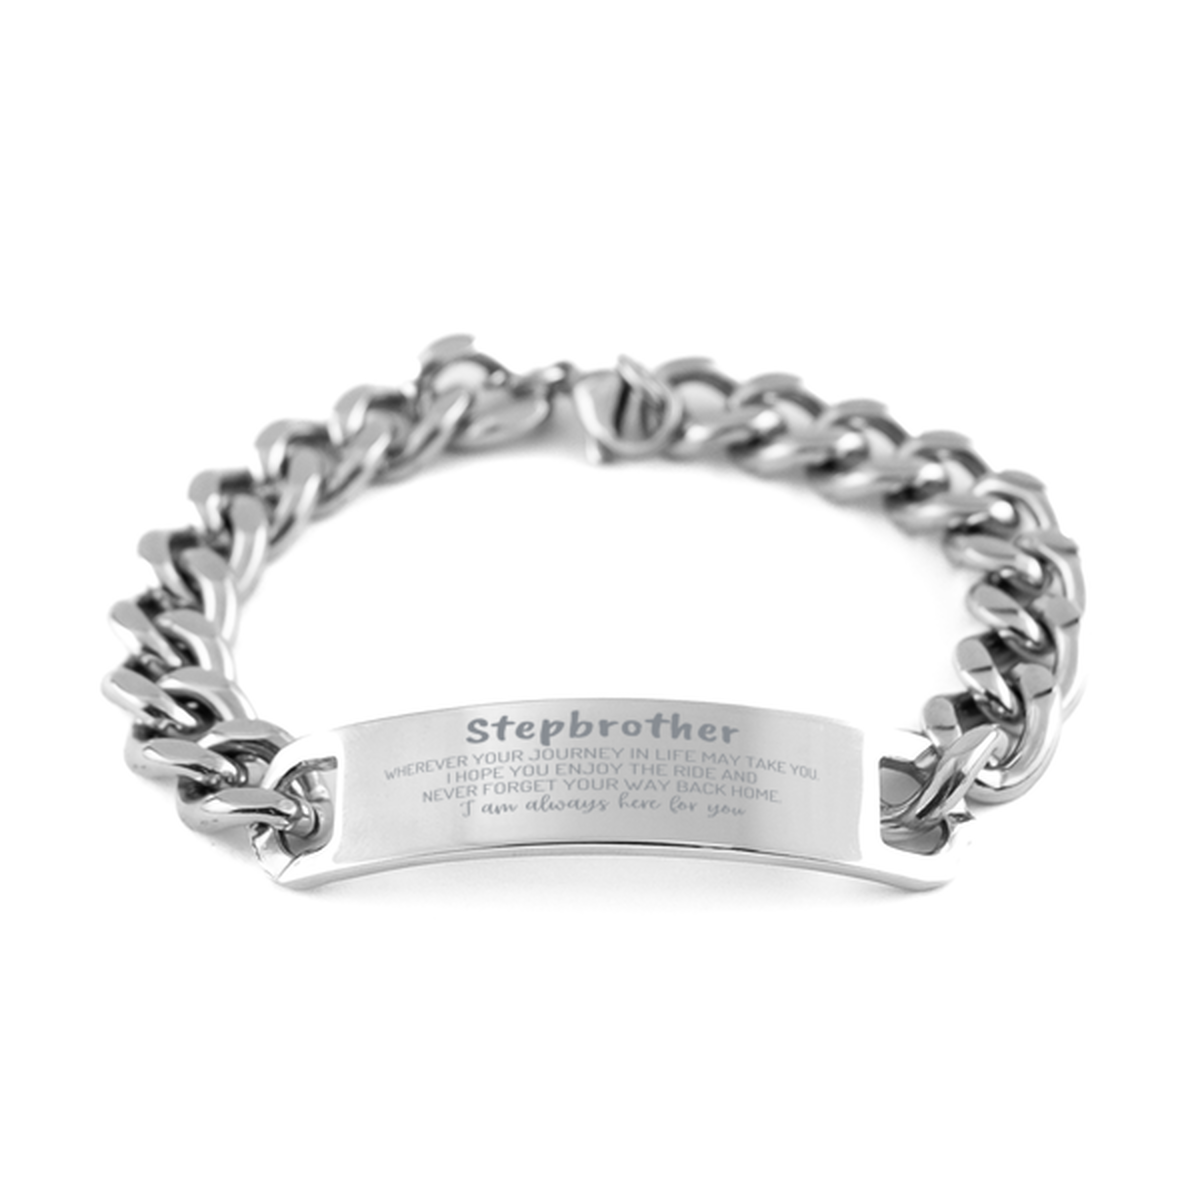 Stepbrother wherever your journey in life may take you, I am always here for you Stepbrother Cuban Chain Stainless Steel Bracelet, Awesome Christmas Gifts For Stepbrother, Stepbrother Birthday Gifts for Men Women Family Loved One